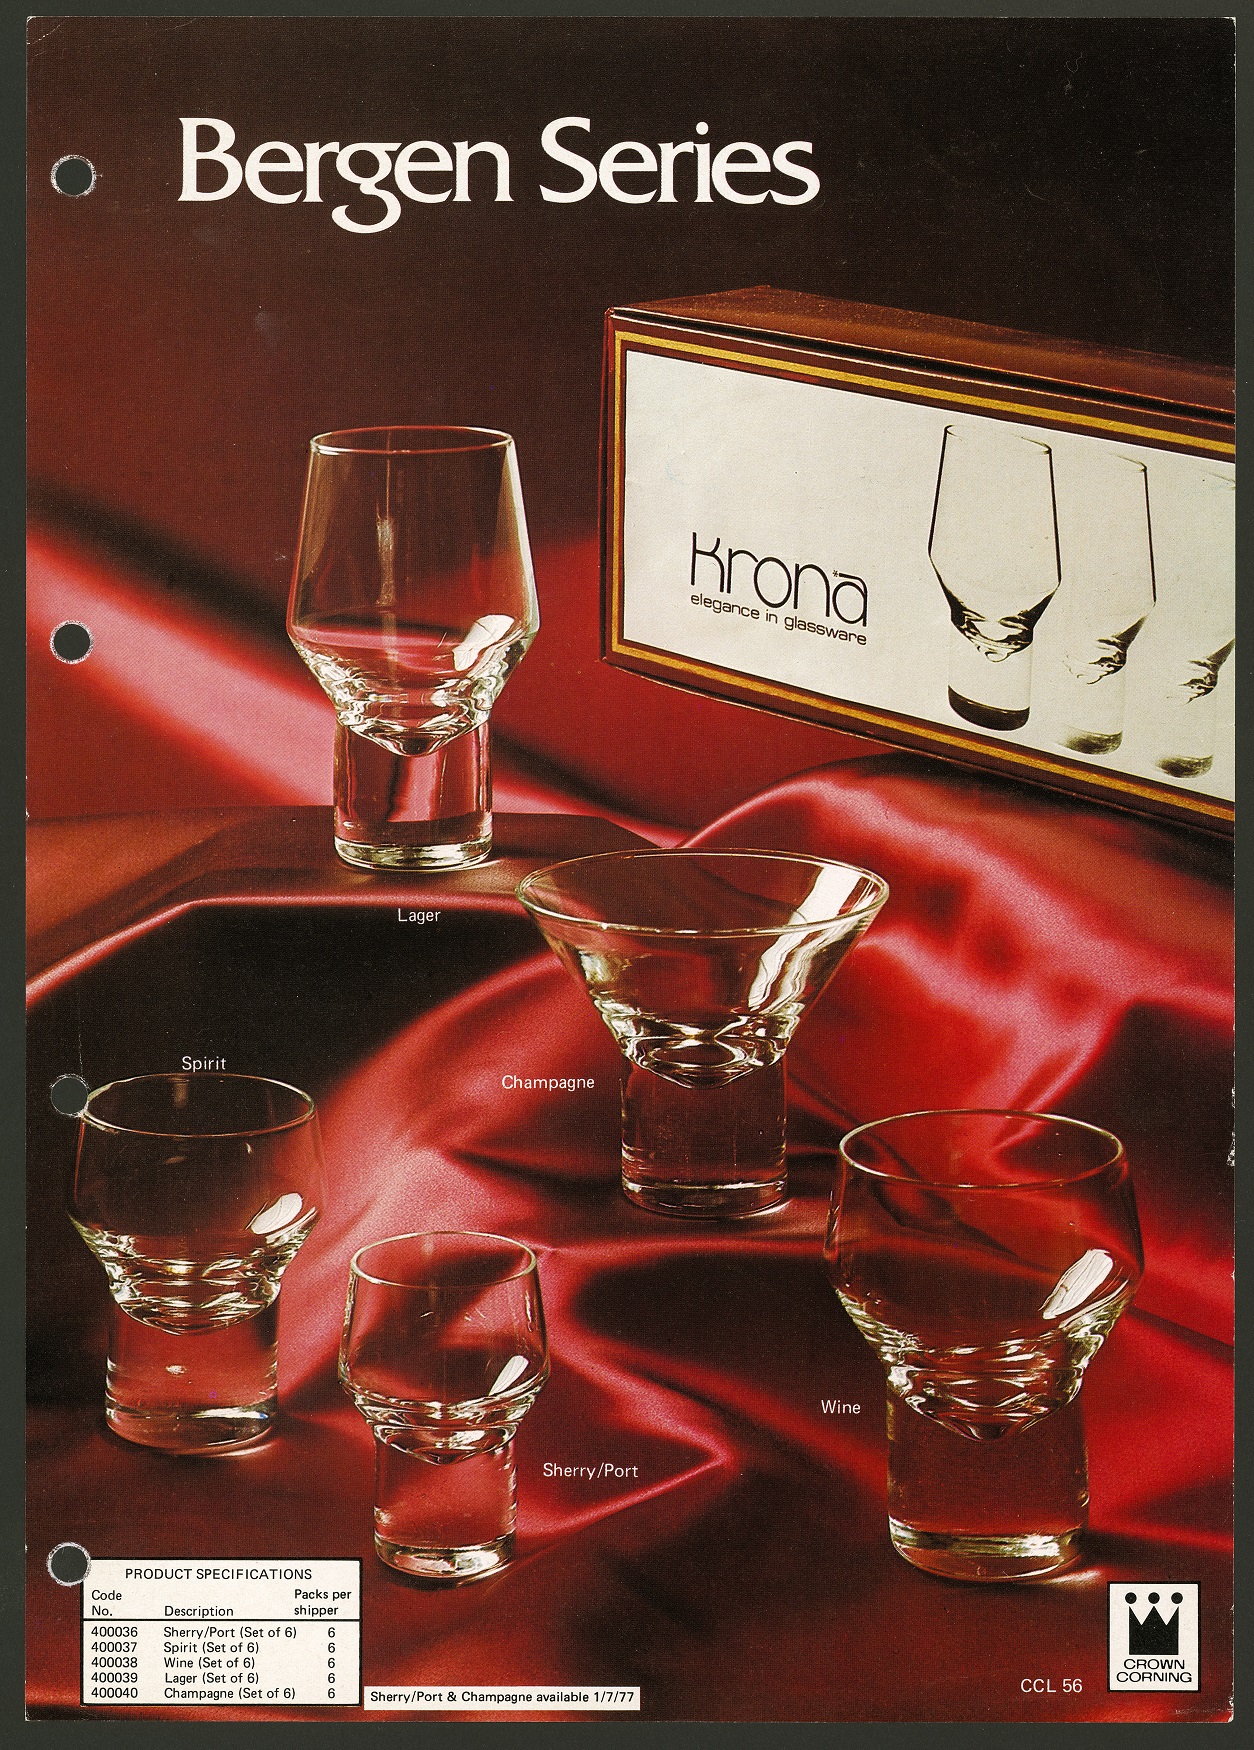 Advertising photograph for 'Bergen Series' drinking glasses. Glasses of various shapes and sizes are displayed on a red satin fabric, with packaging for the glasses in the background.